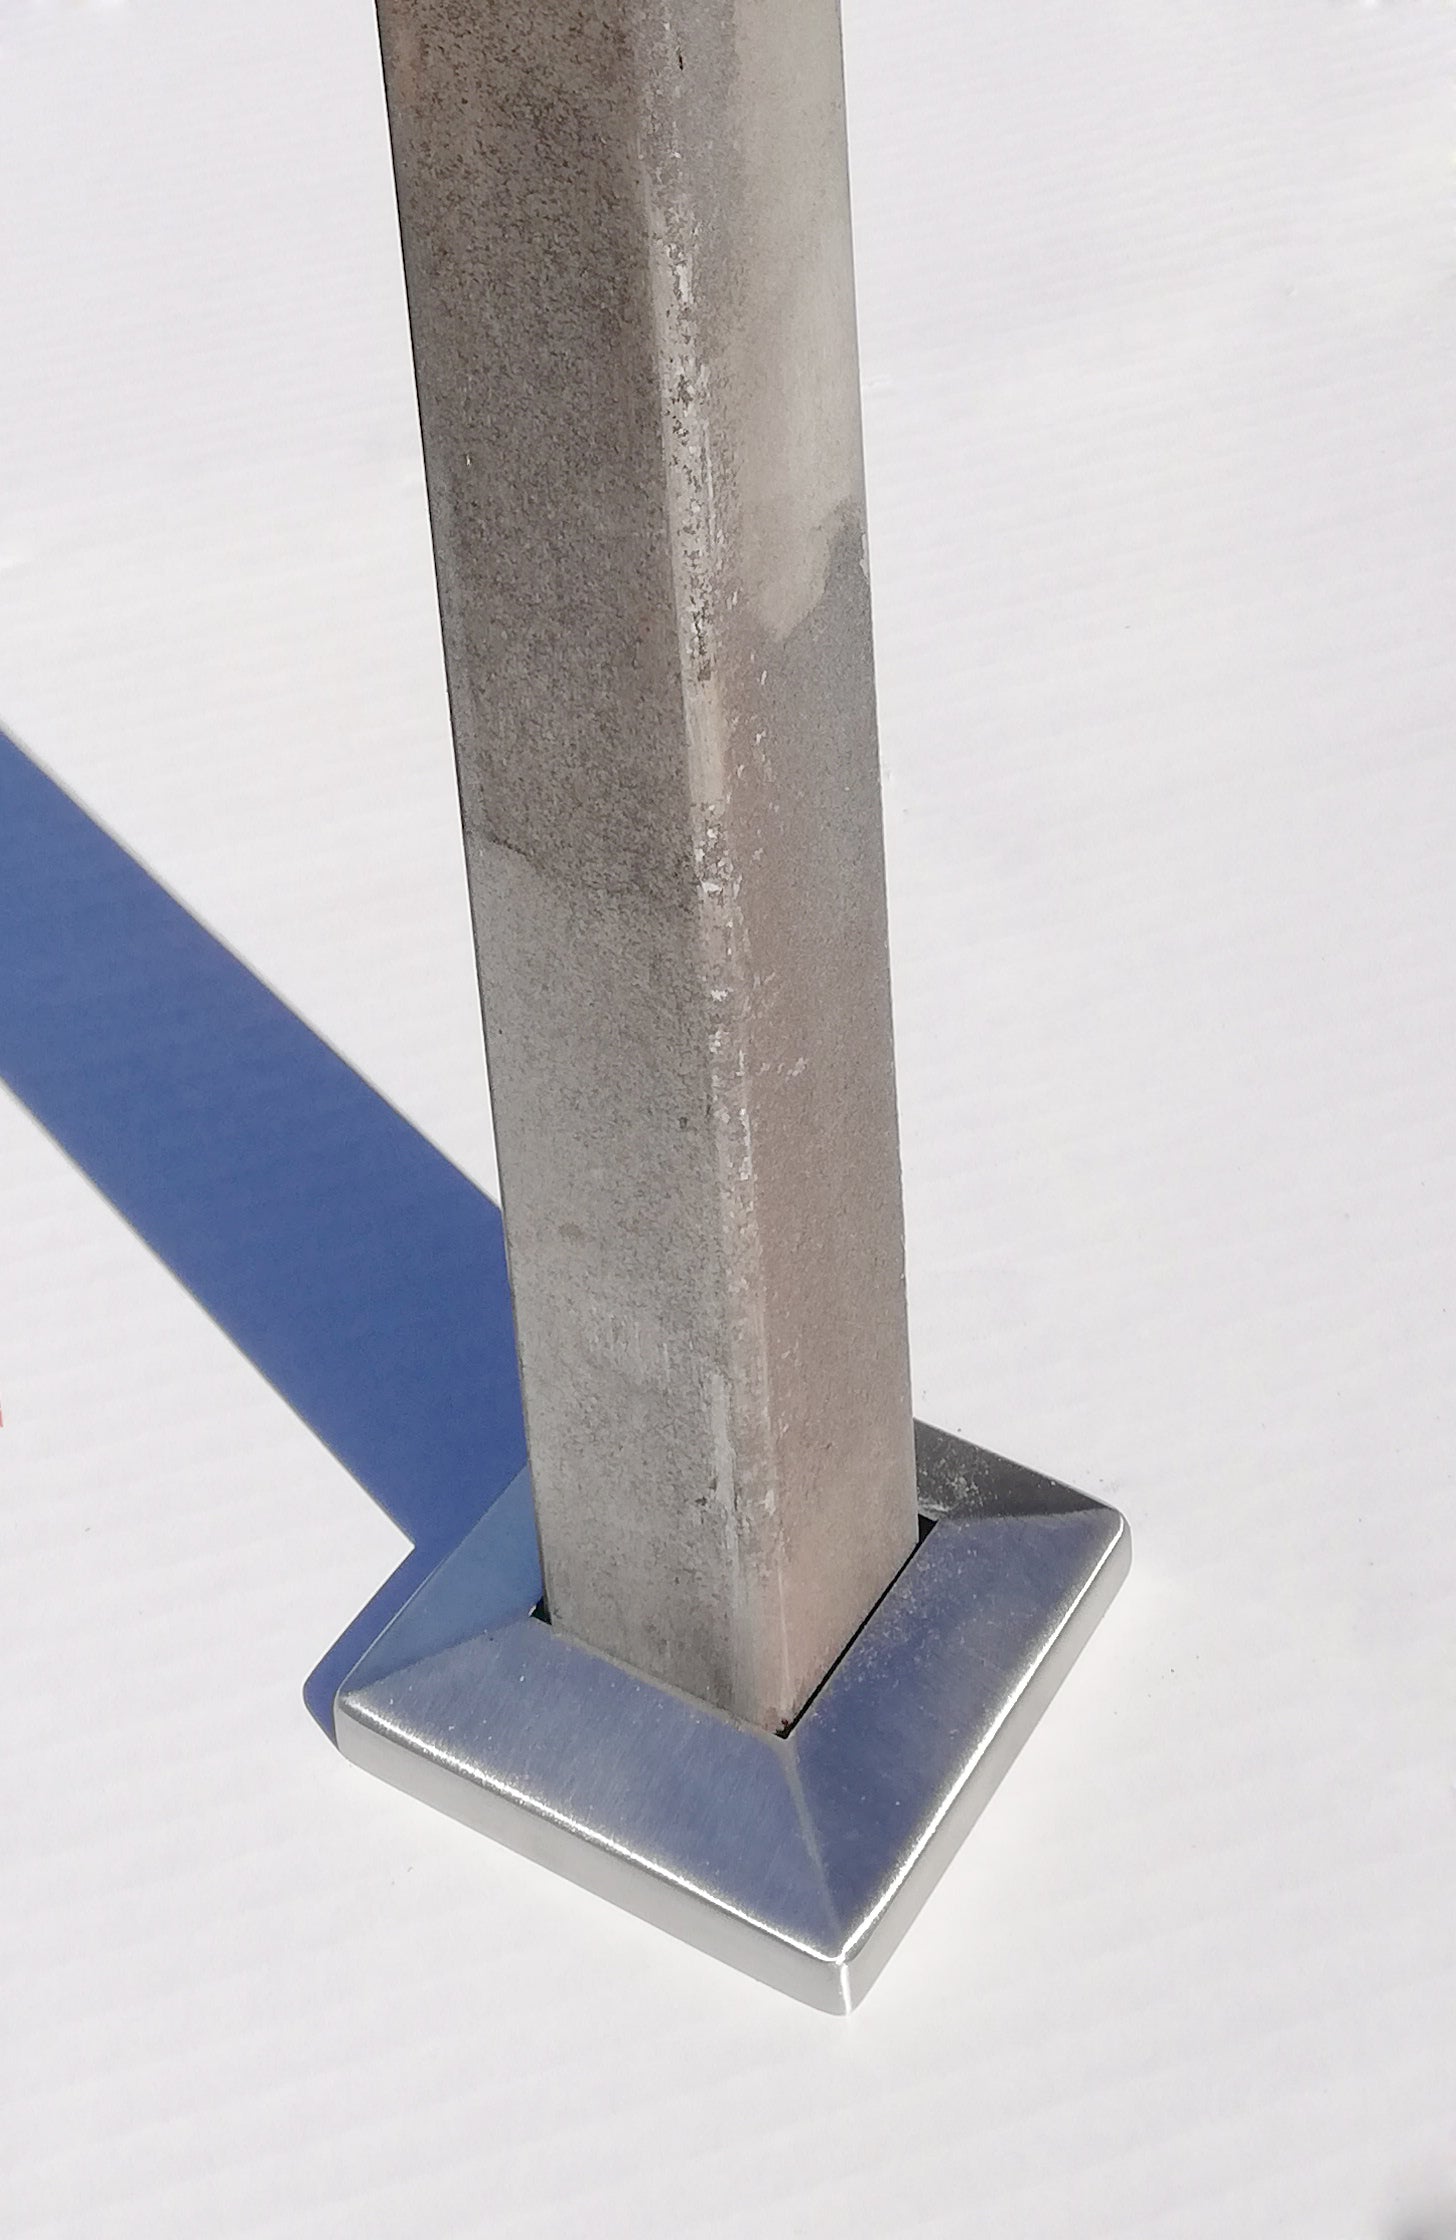 Stainless Steel 316 Grade Square Base Cover and Plate for 1-1/2" Post Fitting (C1060-150) - SHEMONICO